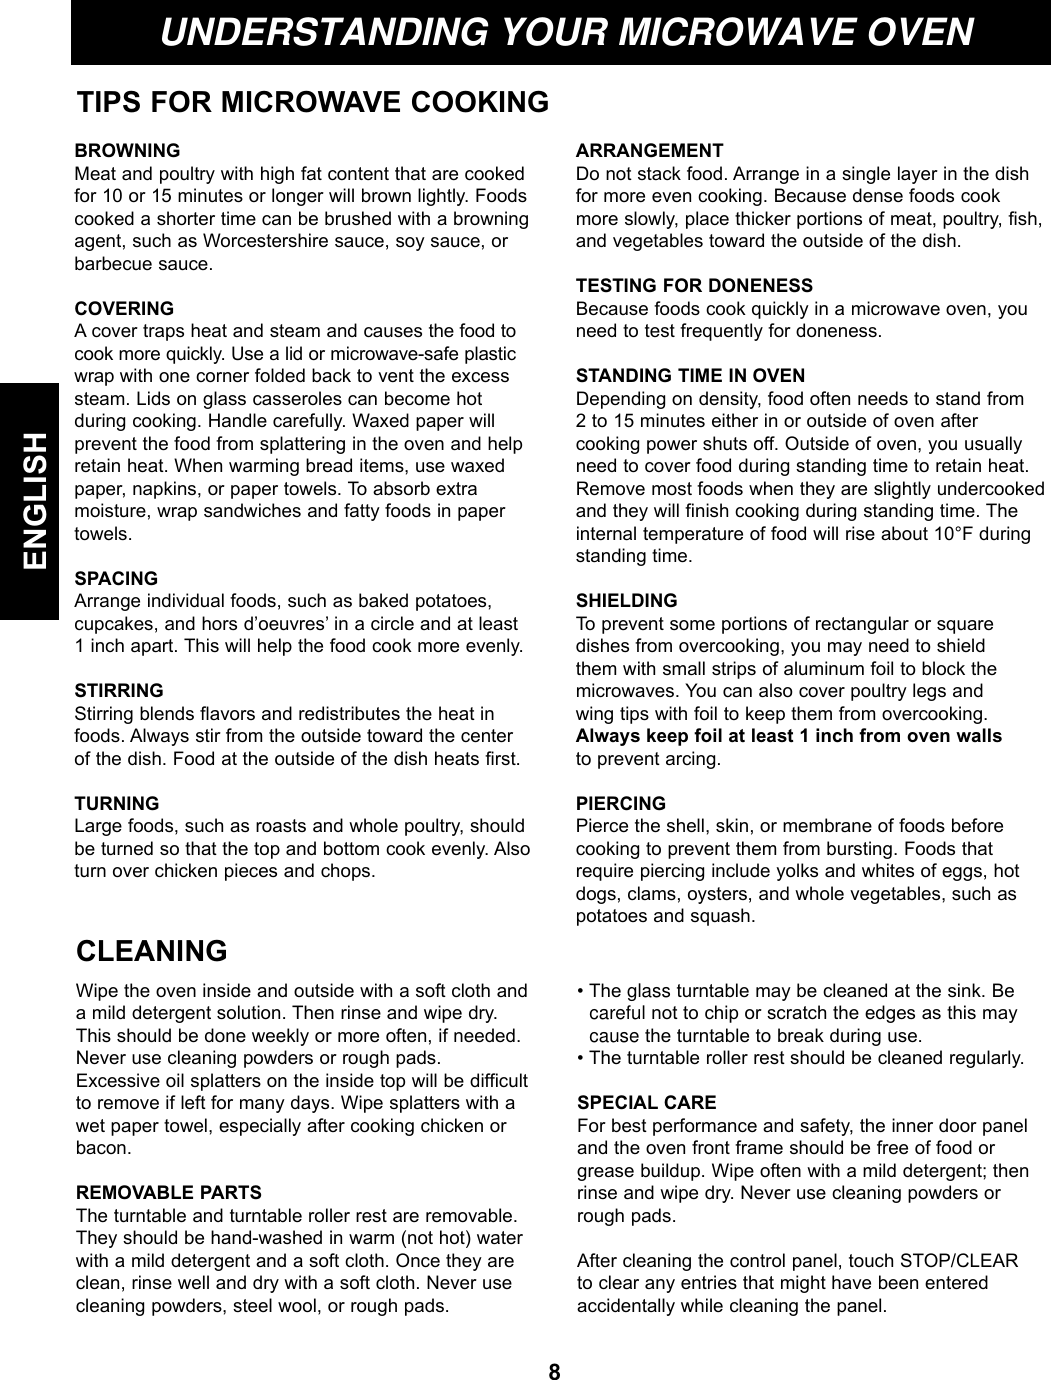 8ENGLISHUNDERSTANDING YOUR MICROWAVE OVENTIPS FOR MICROWAVE COOKINGBROWNINGMeat and poultry with high fat content that are cookedfor 10 or 15 minutes or longer will brown lightly. Foodscooked a shorter time can be brushed with a browningagent, such as Worcestershire sauce, soy sauce, orbarbecue sauce.COVERING A cover traps heat and steam and causes the food tocook more quickly. Use a lid or microwave-safe plasticwrap with one corner folded back to vent the excesssteam. Lids on glass casseroles can become hot during cooking. Handle carefully. Waxed paper will prevent the food from splattering in the oven and helpretain heat. When warming bread items, use waxedpaper, napkins, or paper towels. To absorb extra moisture, wrap sandwiches and fatty foods in papertowels.SPACINGArrange individual foods, such as baked potatoes, cupcakes, and hors d’oeuvres’ in a circle and at least 1 inch apart. This will help the food cook more evenly.STIRRING Stirring blends flavors and redistributes the heat infoods. Always stir from the outside toward the center of the dish. Food at the outside of the dish heats first.TURNINGLarge foods, such as roasts and whole poultry, shouldbe turned so that the top and bottom cook evenly. Alsoturn over chicken pieces and chops.ARRANGEMENTDo not stack food. Arrange in a single layer in the dishfor more even cooking. Because dense foods cookmore slowly, place thicker portions of meat, poultry, fish,and vegetables toward the outside of the dish.TESTING FOR DONENESS Because foods cook quickly in a microwave oven, youneed to test frequently for doneness.STANDING TIME IN OVEN Depending on density, food often needs to stand from 2 to 15 minutes either in or outside of oven aftercooking power shuts off. Outside of oven, you usuallyneed to cover food during standing time to retain heat.Remove most foods when they are slightly undercookedand they will finish cooking during standing time. Theinternal temperature of food will rise about 10°F duringstanding time.SHIELDING To prevent some portions of rectangular or squaredishes from overcooking, you may need to shield them with small strips of aluminum foil to block themicrowaves. You can also cover poultry legs and wing tips with foil to keep them from overcooking.Always keep foil at least 1 inch from oven wallsto prevent arcing.PIERCING Pierce the shell, skin, or membrane of foods beforecooking to prevent them from bursting. Foods thatrequire piercing include yolks and whites of eggs, hotdogs, clams, oysters, and whole vegetables, such aspotatoes and squash.CLEANINGWipe the oven inside and outside with a soft cloth anda mild detergent solution. Then rinse and wipe dry.This should be done weekly or more often, if needed.Never use cleaning powders or rough pads.Excessive oil splatters on the inside top will be difficultto remove if left for many days. Wipe splatters with awet paper towel, especially after cooking chicken orbacon.REMOVABLE PARTSThe turntable and turntable roller rest are removable.They should be hand-washed in warm (not hot) waterwith a mild detergent and a soft cloth. Once they areclean, rinse well and dry with a soft cloth. Never usecleaning powders, steel wool, or rough pads.• The glass turntable may be cleaned at the sink. Be careful not to chip or scratch the edges as this may cause the turntable to break during use.• The turntable roller rest should be cleaned regularly.SPECIAL CAREFor best performance and safety, the inner door paneland the oven front frame should be free of food orgrease buildup. Wipe often with a mild detergent; thenrinse and wipe dry. Never use cleaning powders orrough pads.After cleaning the control panel, touch STOP/CLEARto clear any entries that might have been enteredaccidentally while cleaning the panel.